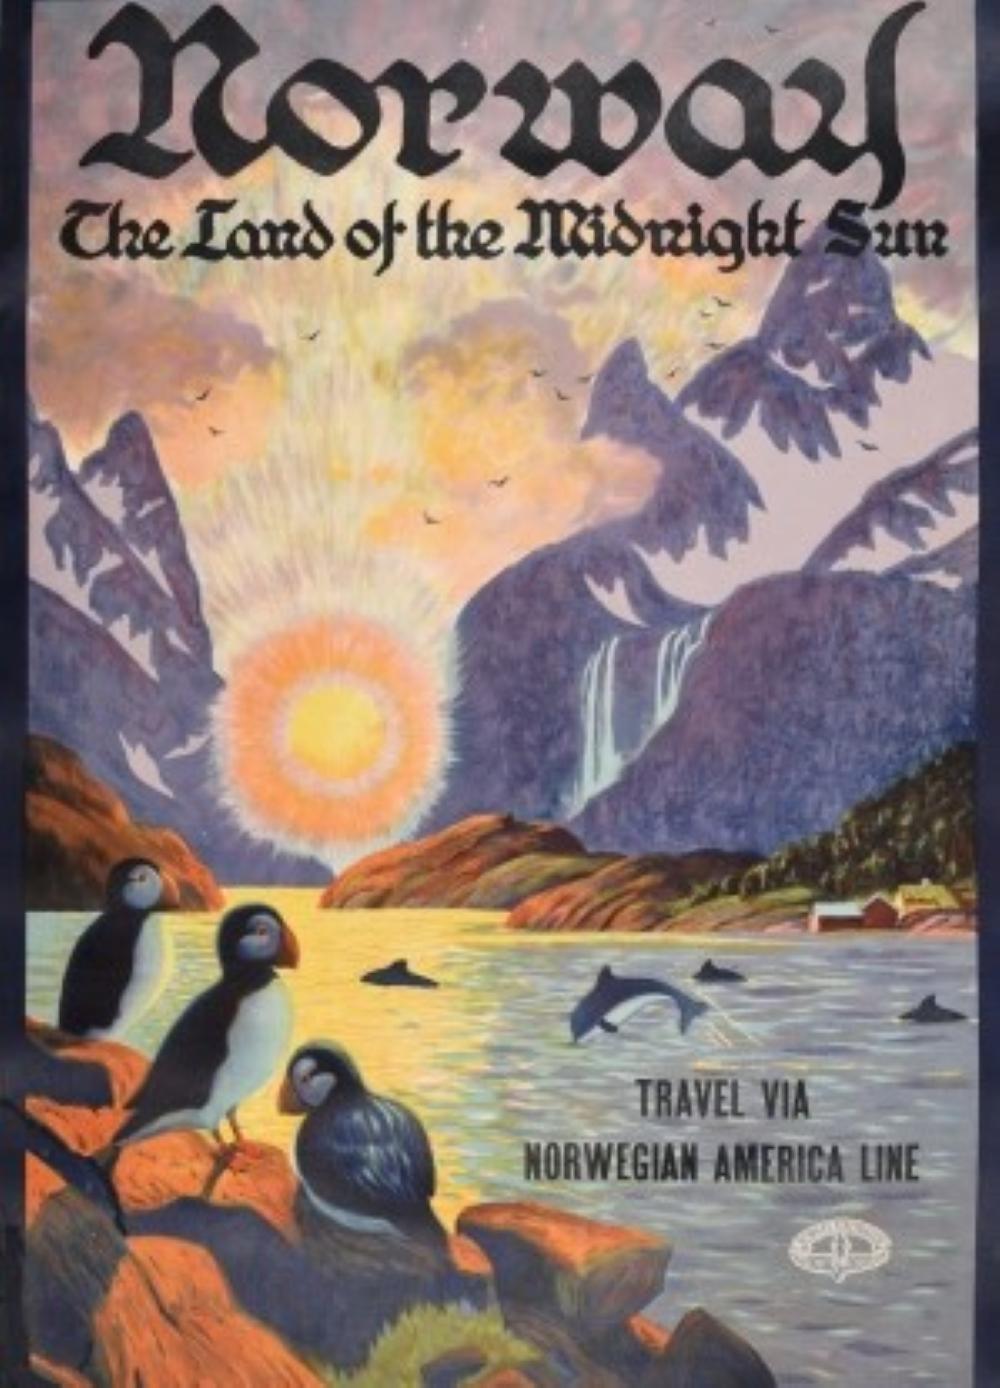 norway land of the midnight sun poster